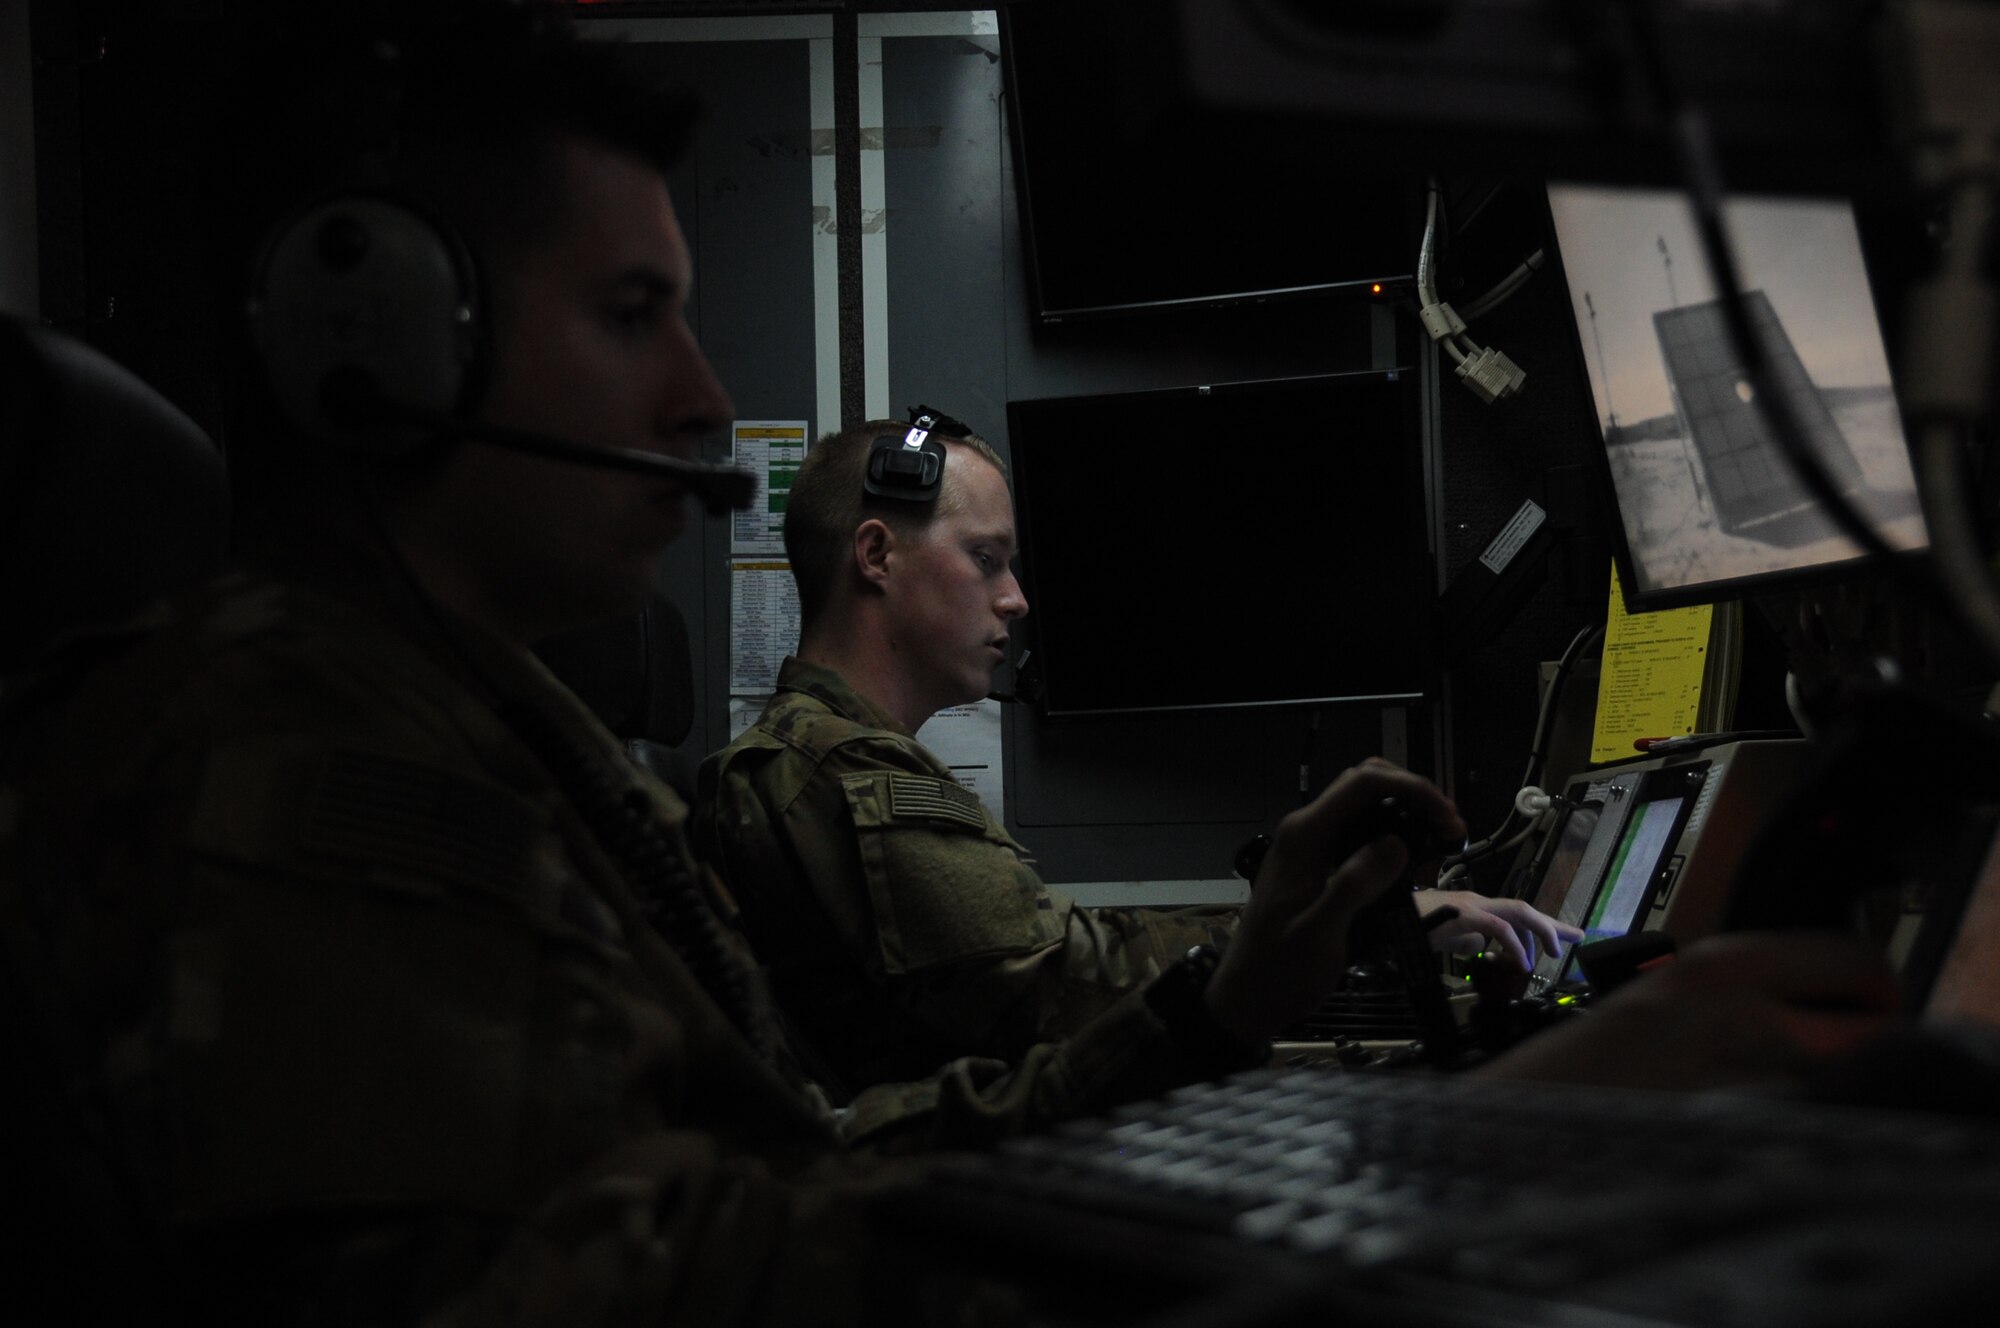 Senior Airman James, left, 46th Expeditionary Reconnaissance Squadron sensor operator, and 1st Lt. Matthew, right, 46th ERS pilot, sit inside a ground station control at an undisclosed location in Southwest Asia Feb. 14, 2017. The 46th ERS Airmen conduct launch and recoveries of MQ-1 Predator remotely piloted aircraft in support of Operation Inherent Resolve. (U.S. Air Force photo/Tech. Sgt. Kenneth McCann)